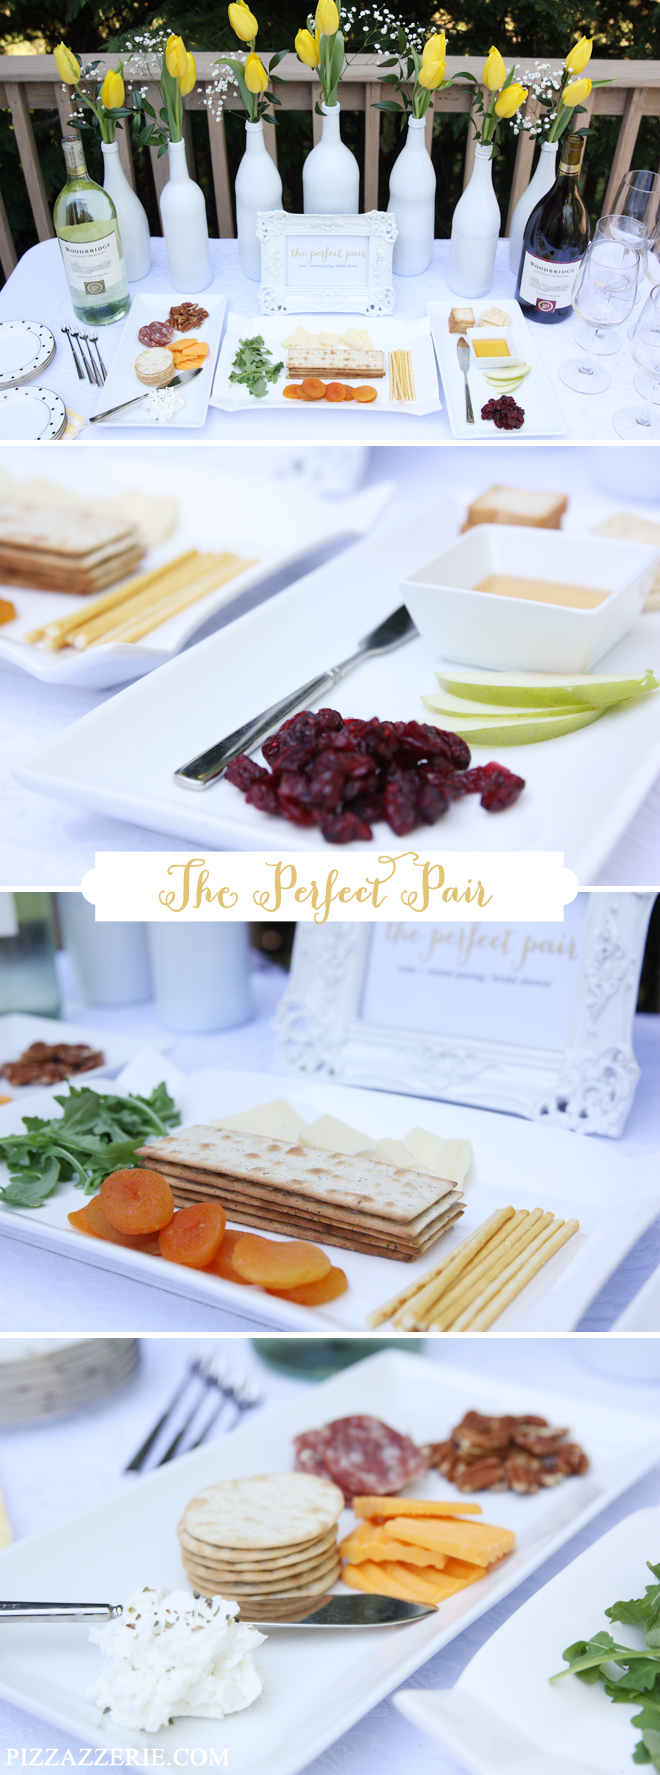 Bridal Shower – Wine + Cheese Pairing for The Perfect Pair via the fabulous @Cou